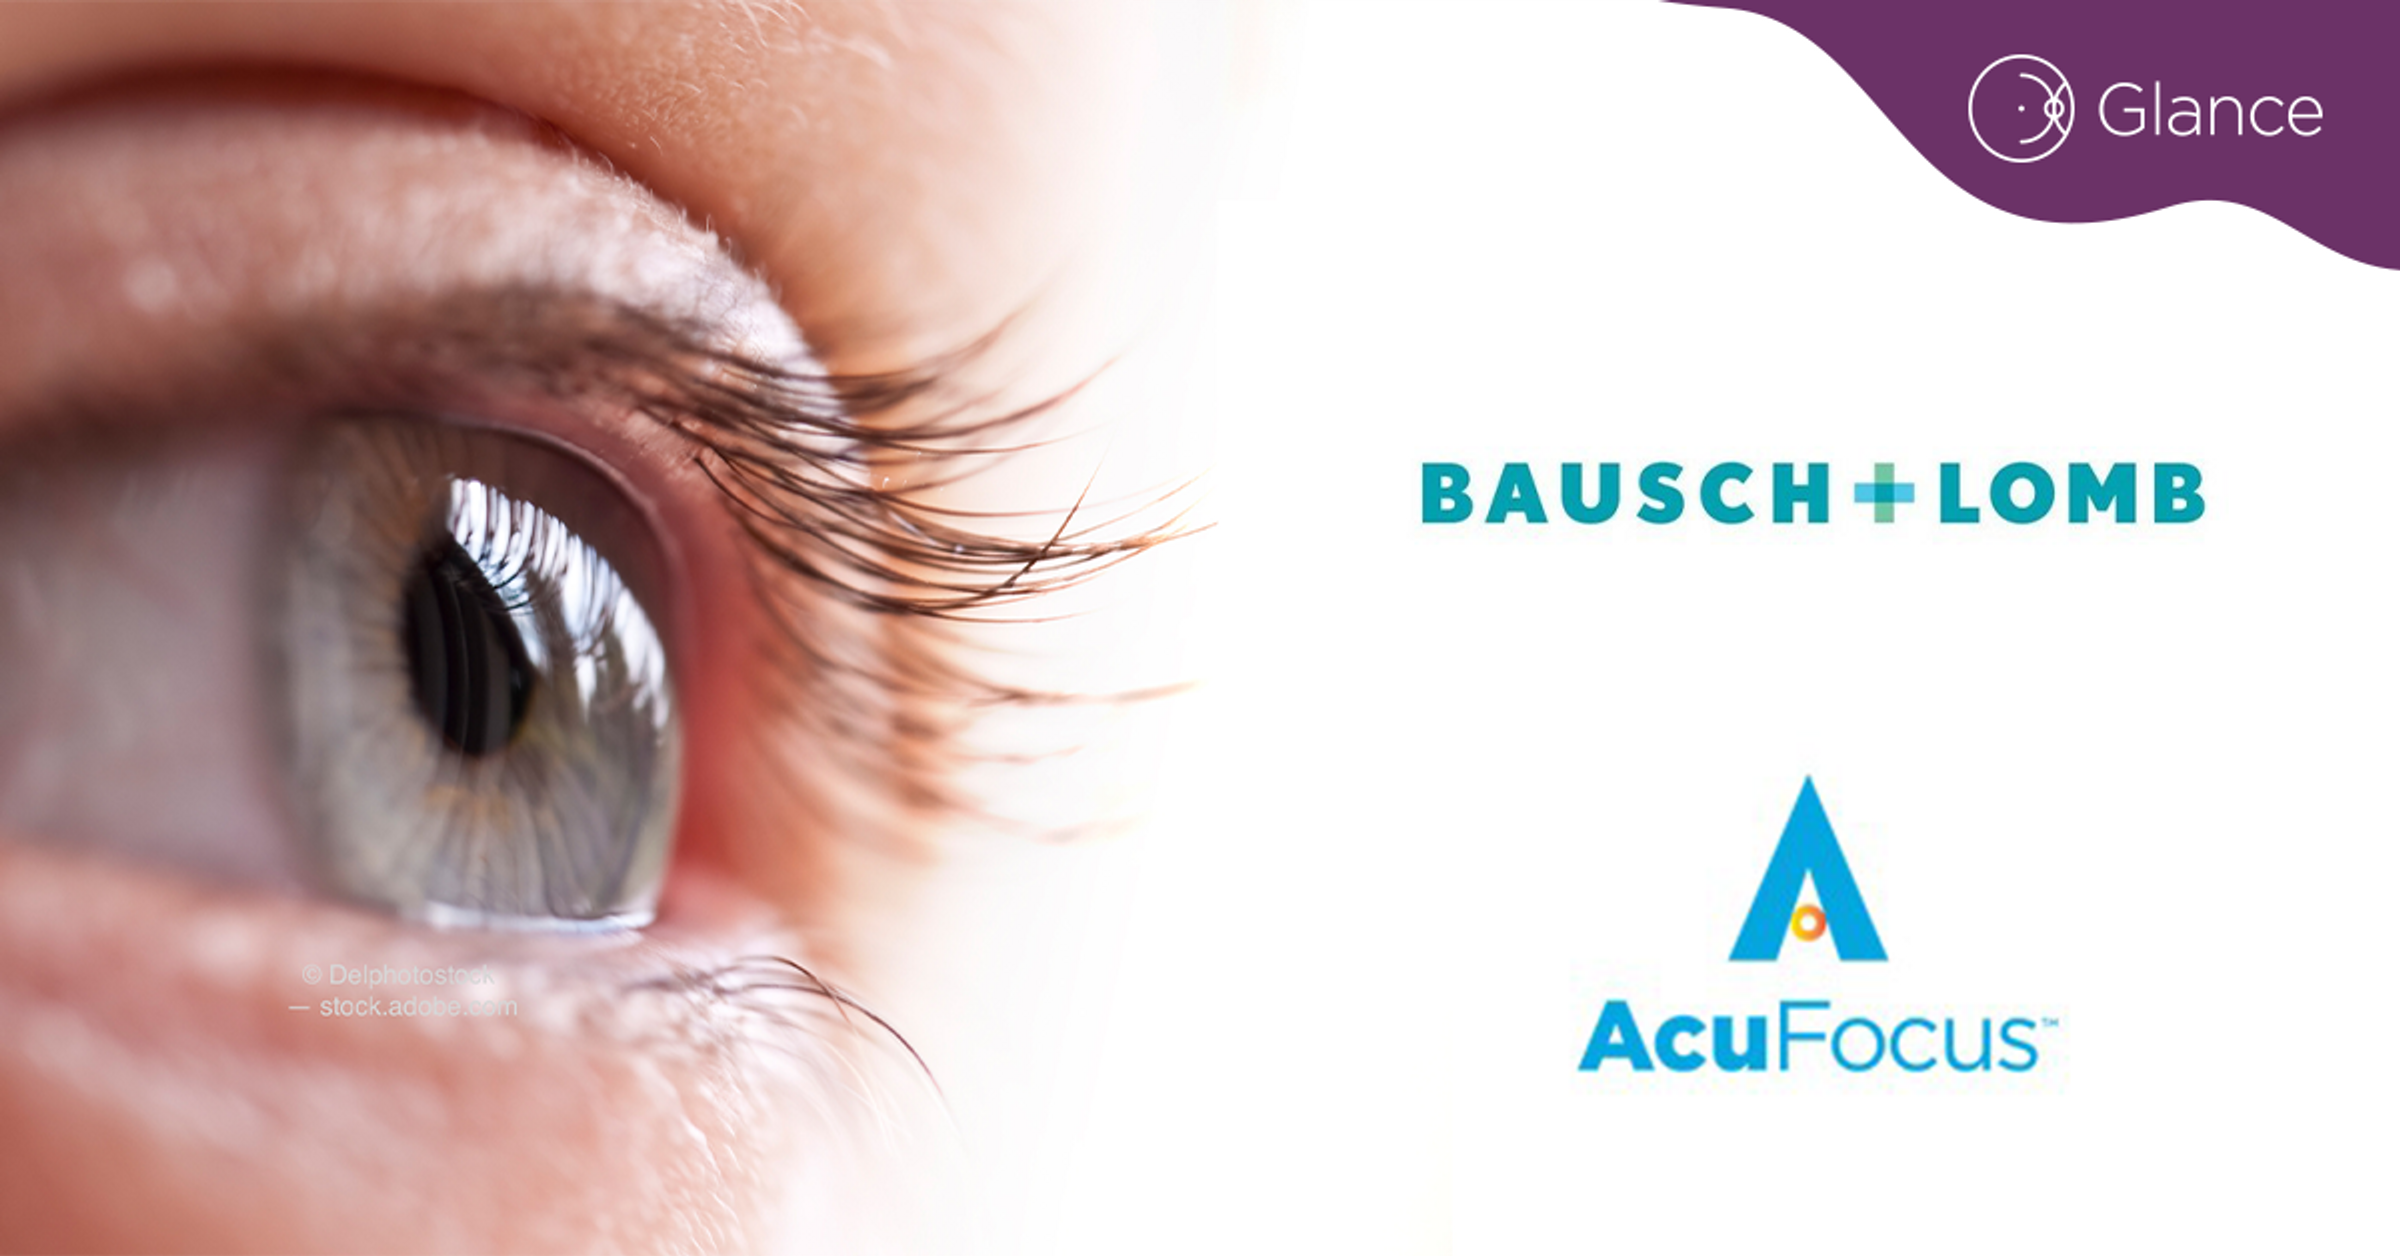 Bausch + Lomb to purchase AcuFocus 